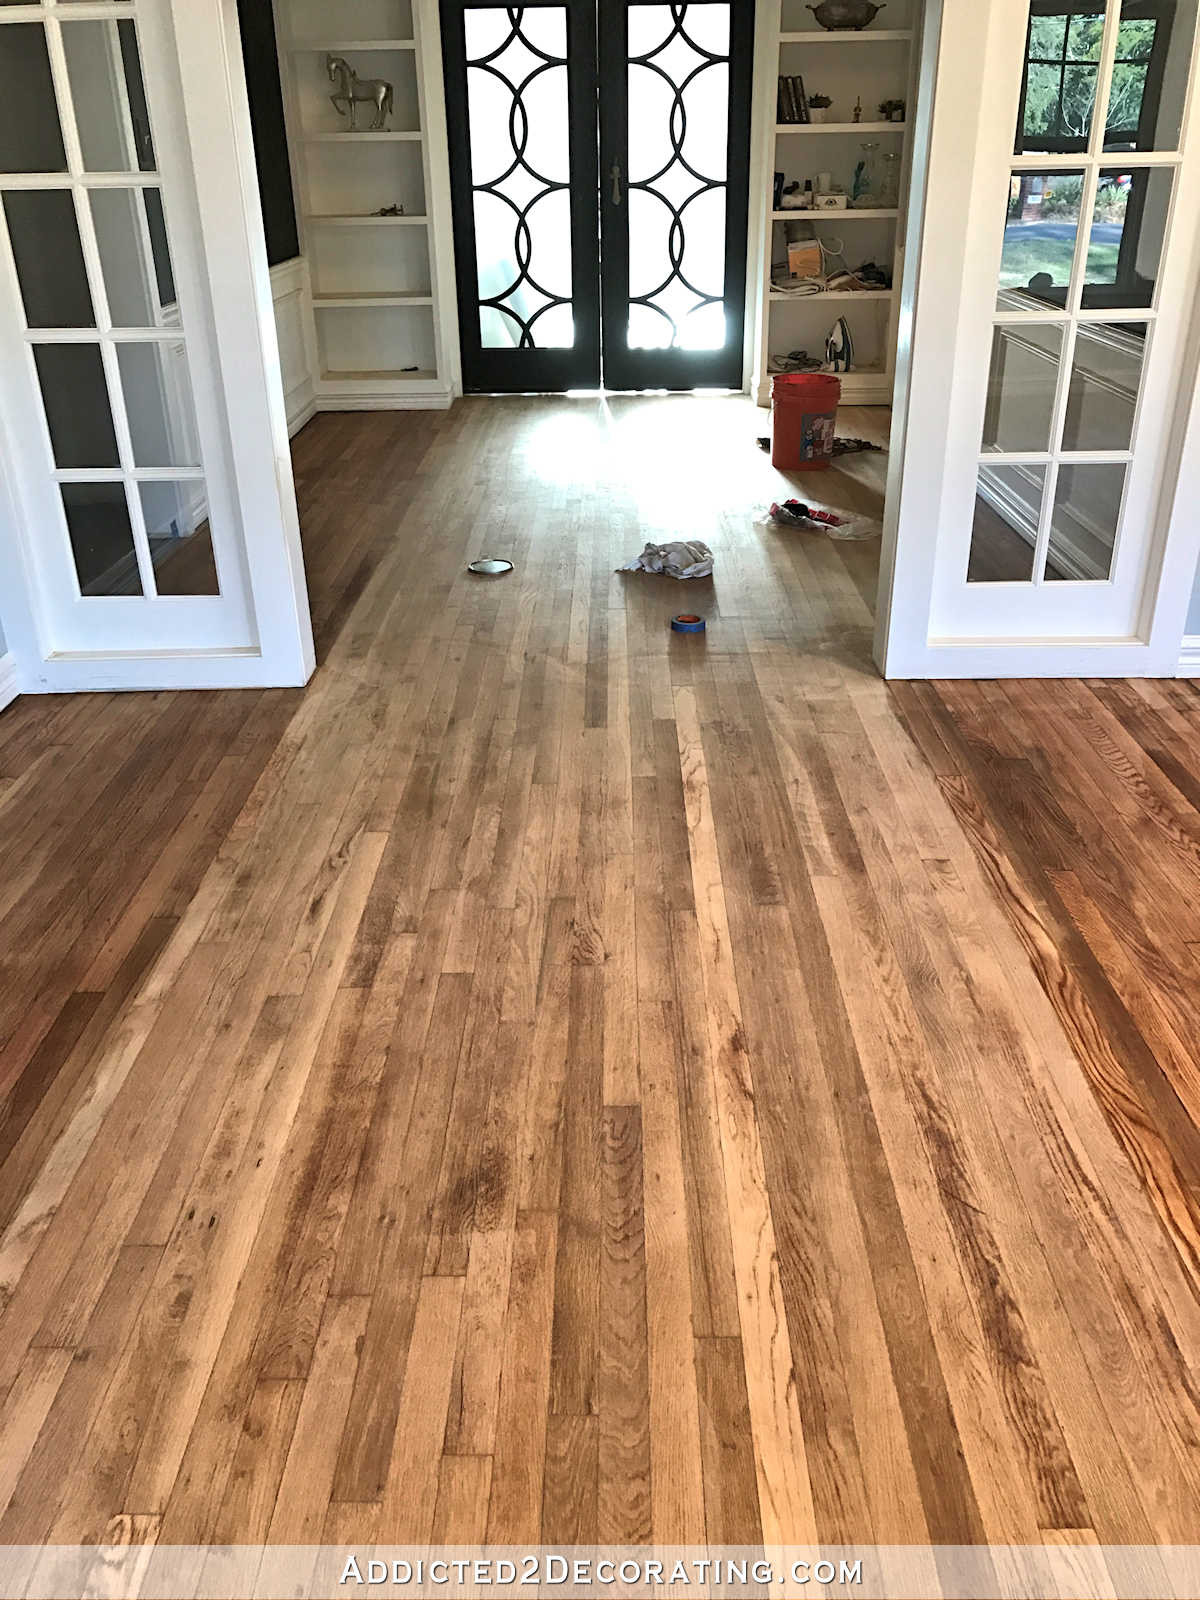 21 attractive How to Estimate Hardwood Floor Installation 2024 free download how to estimate hardwood floor installation of adventures in staining my red oak hardwood floors products process for staining red oak hardwood floors 5 music room wood conditioner